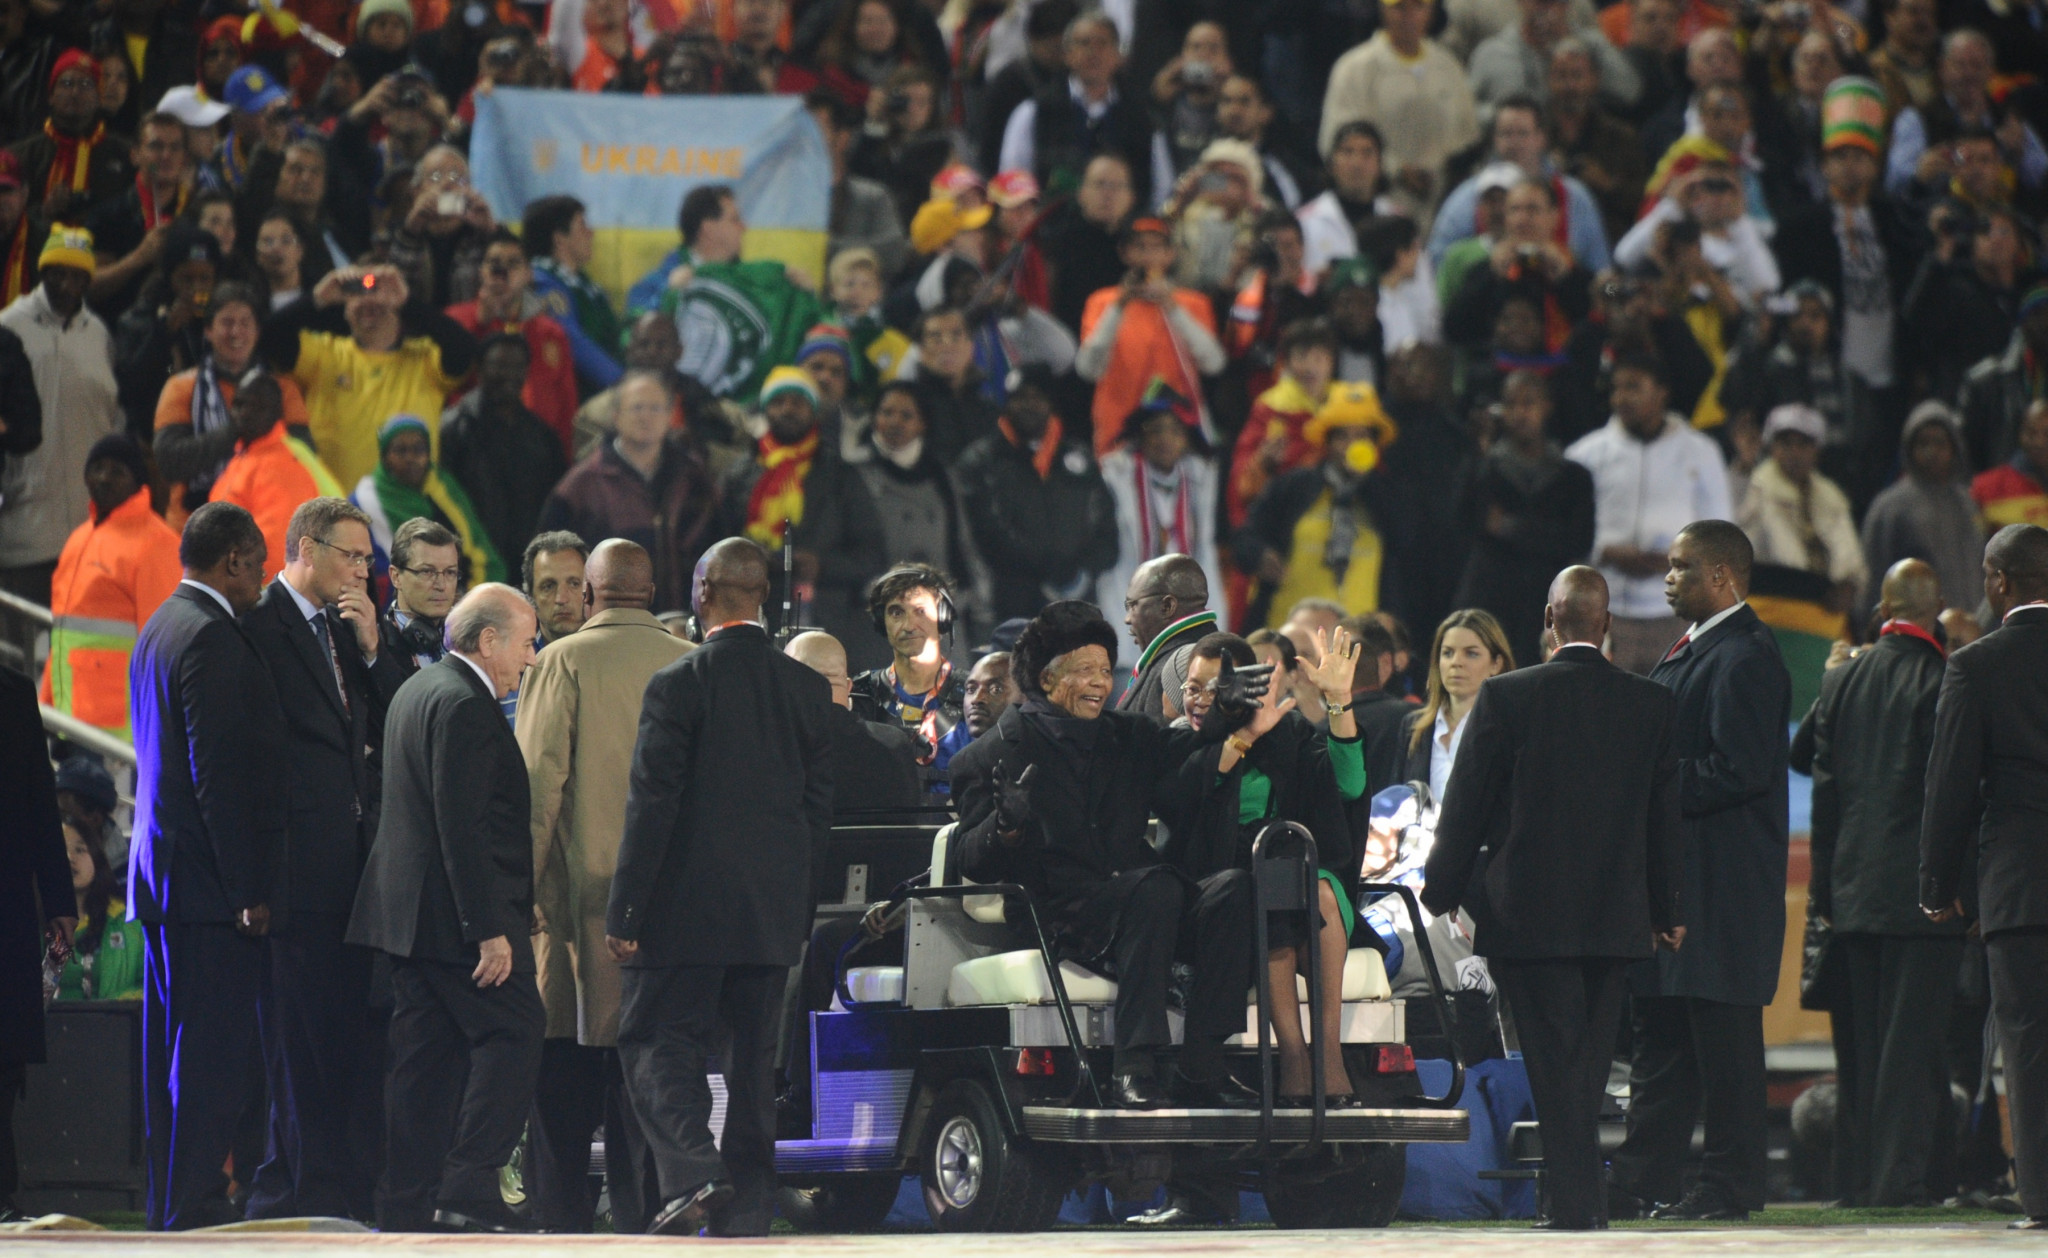 It was at the 2010 FIFA World Cup where Nelson Mandela made his last public appearance ©Getty Images